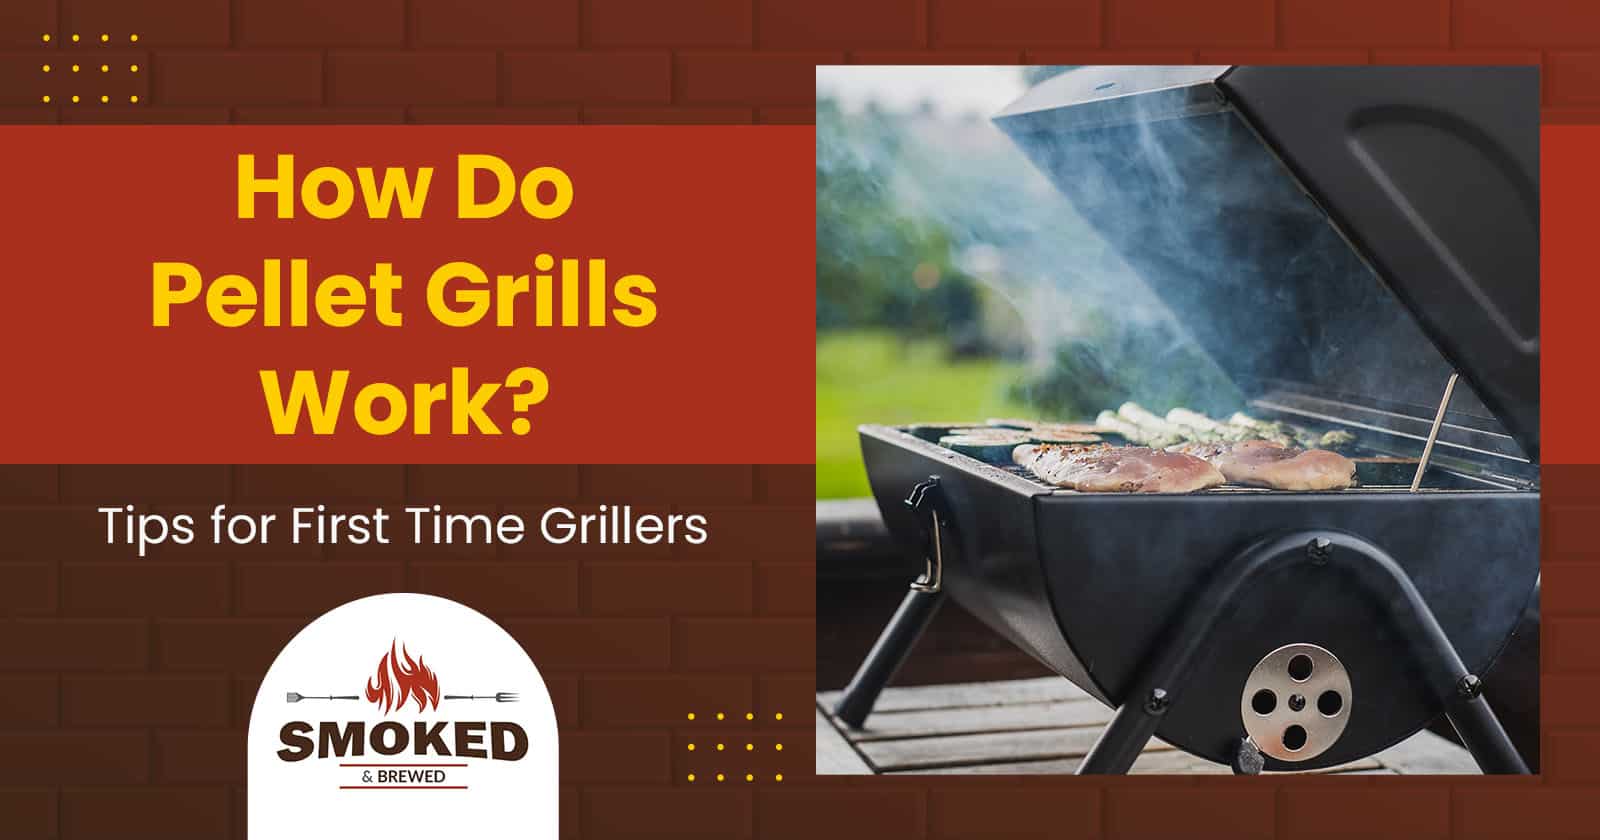 How Do Pellet Grills Work? Tips for First Time Grillers